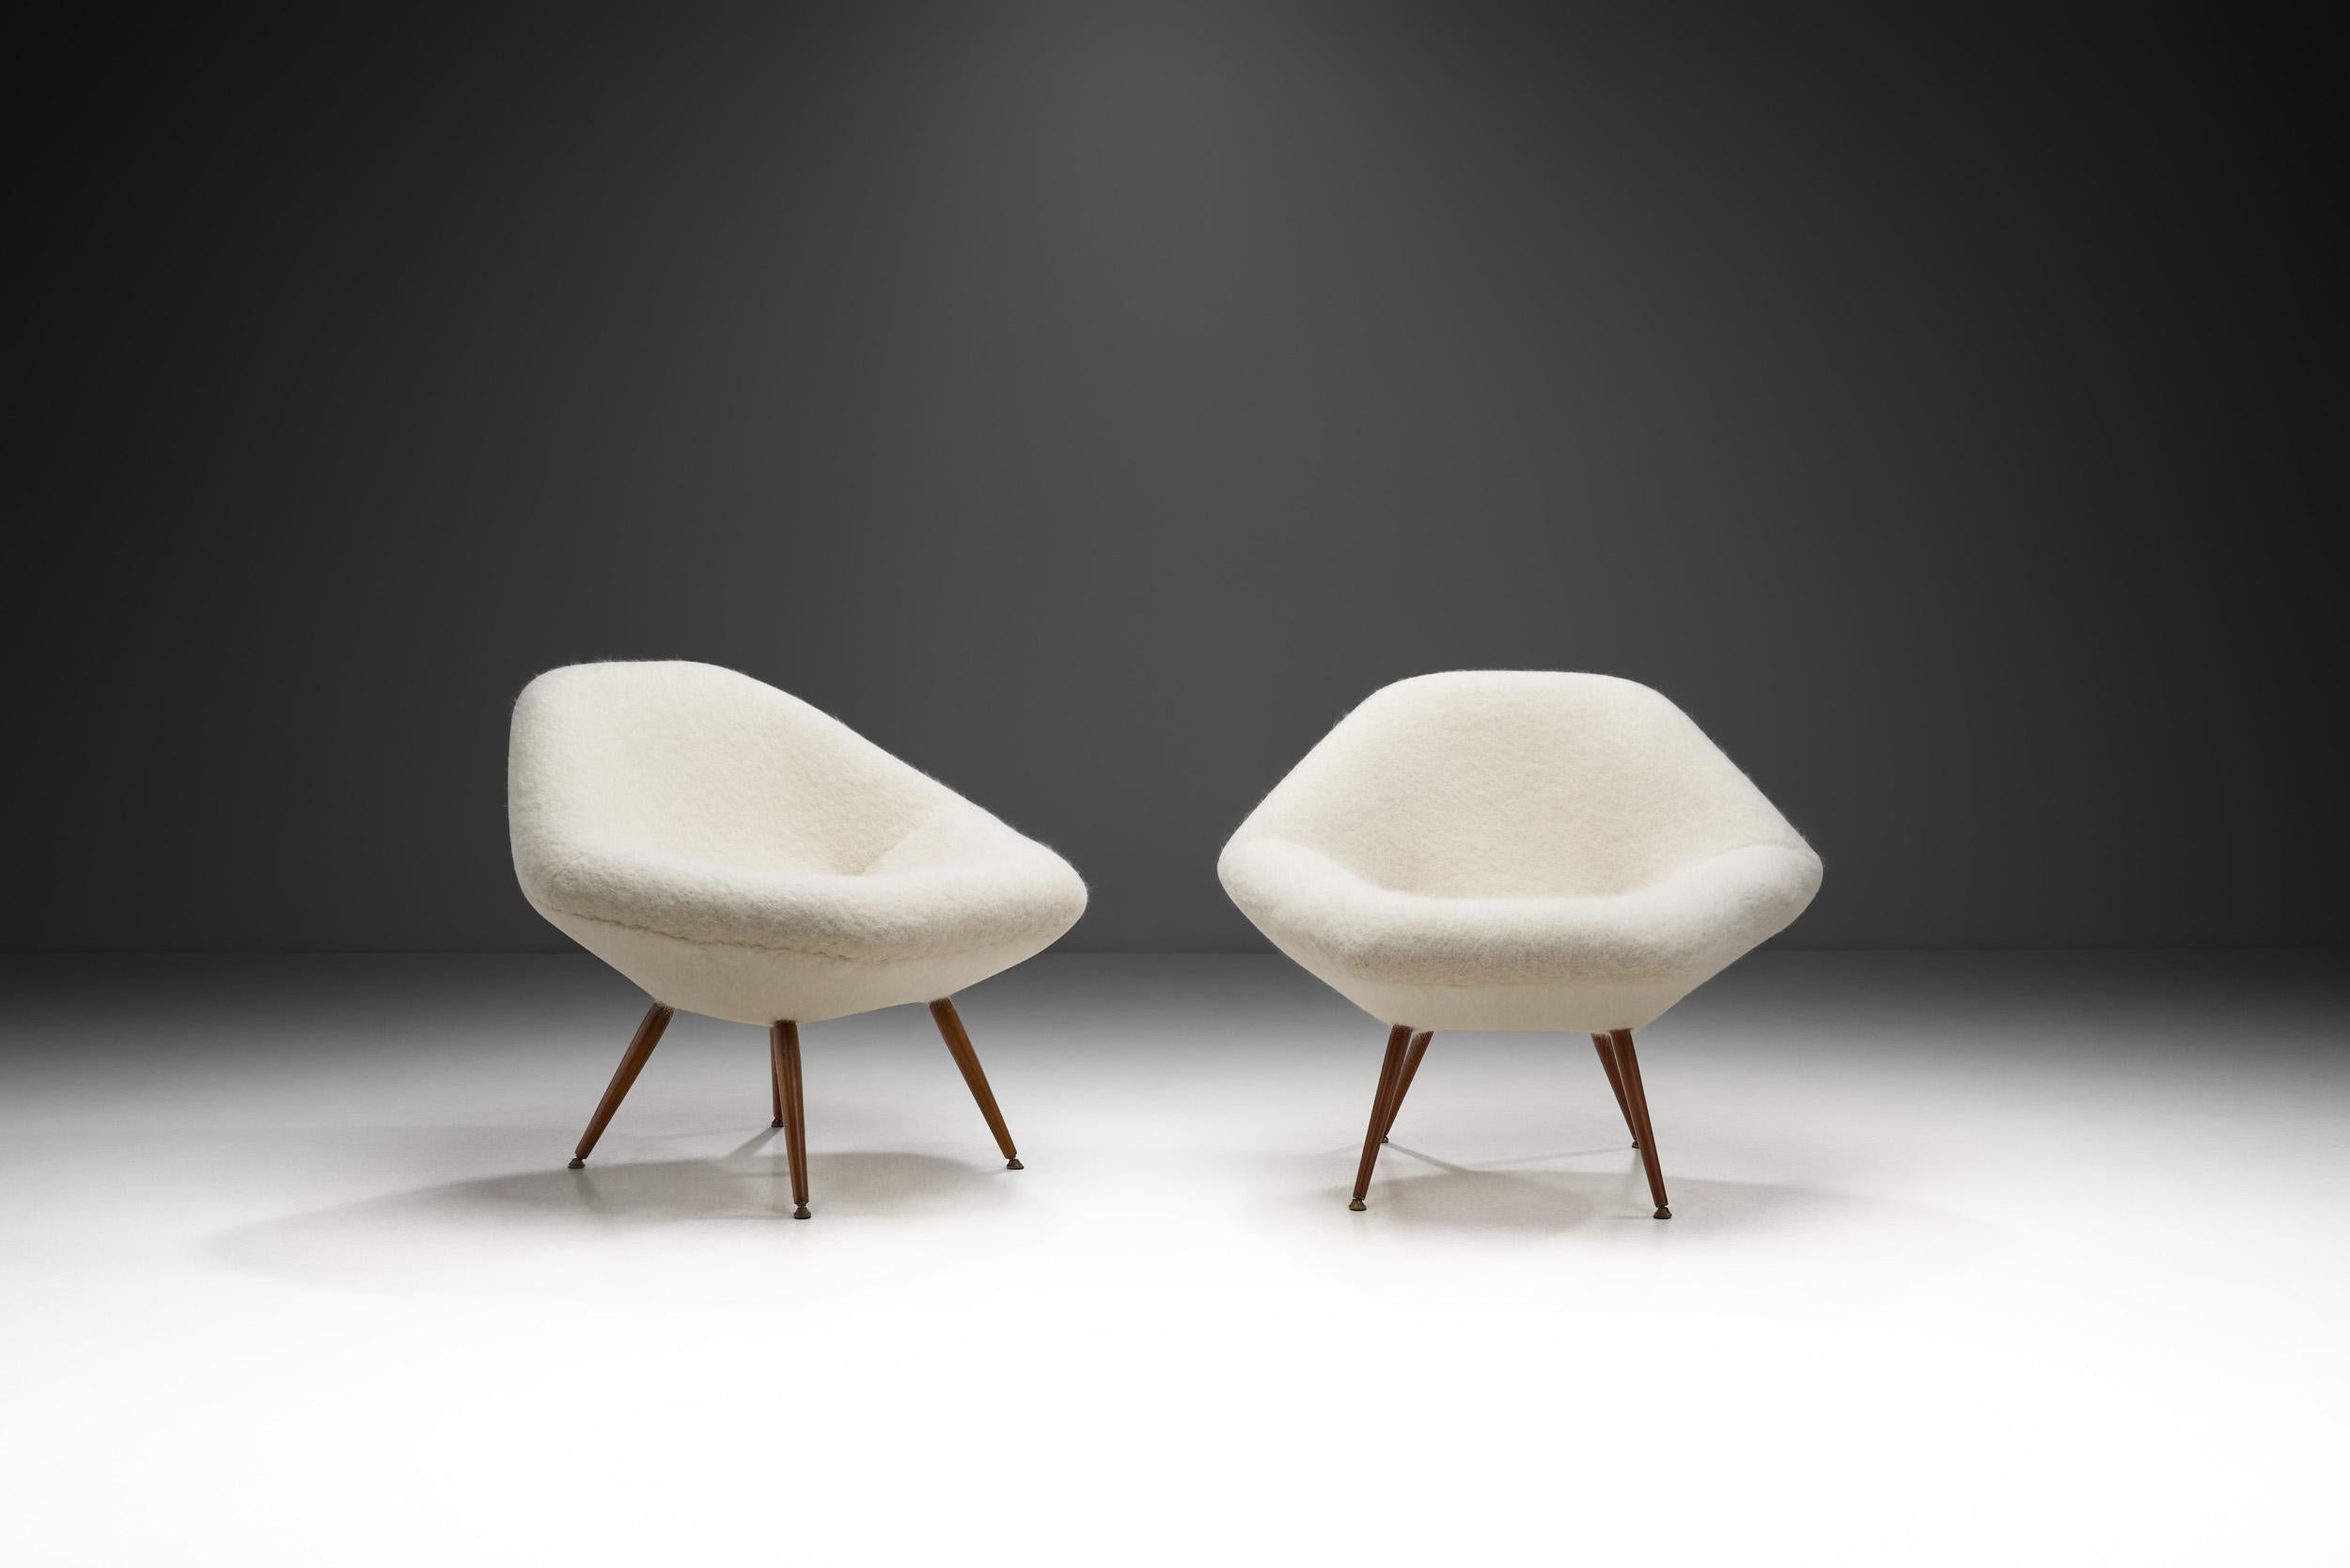 Swedish furniture design is a modernist story of enduring style. With their elegant shell shape, these lounge chairs embody the timeless appeal of Swedish furniture that was set in the past, by a cluster of iconic designers, but it continues to